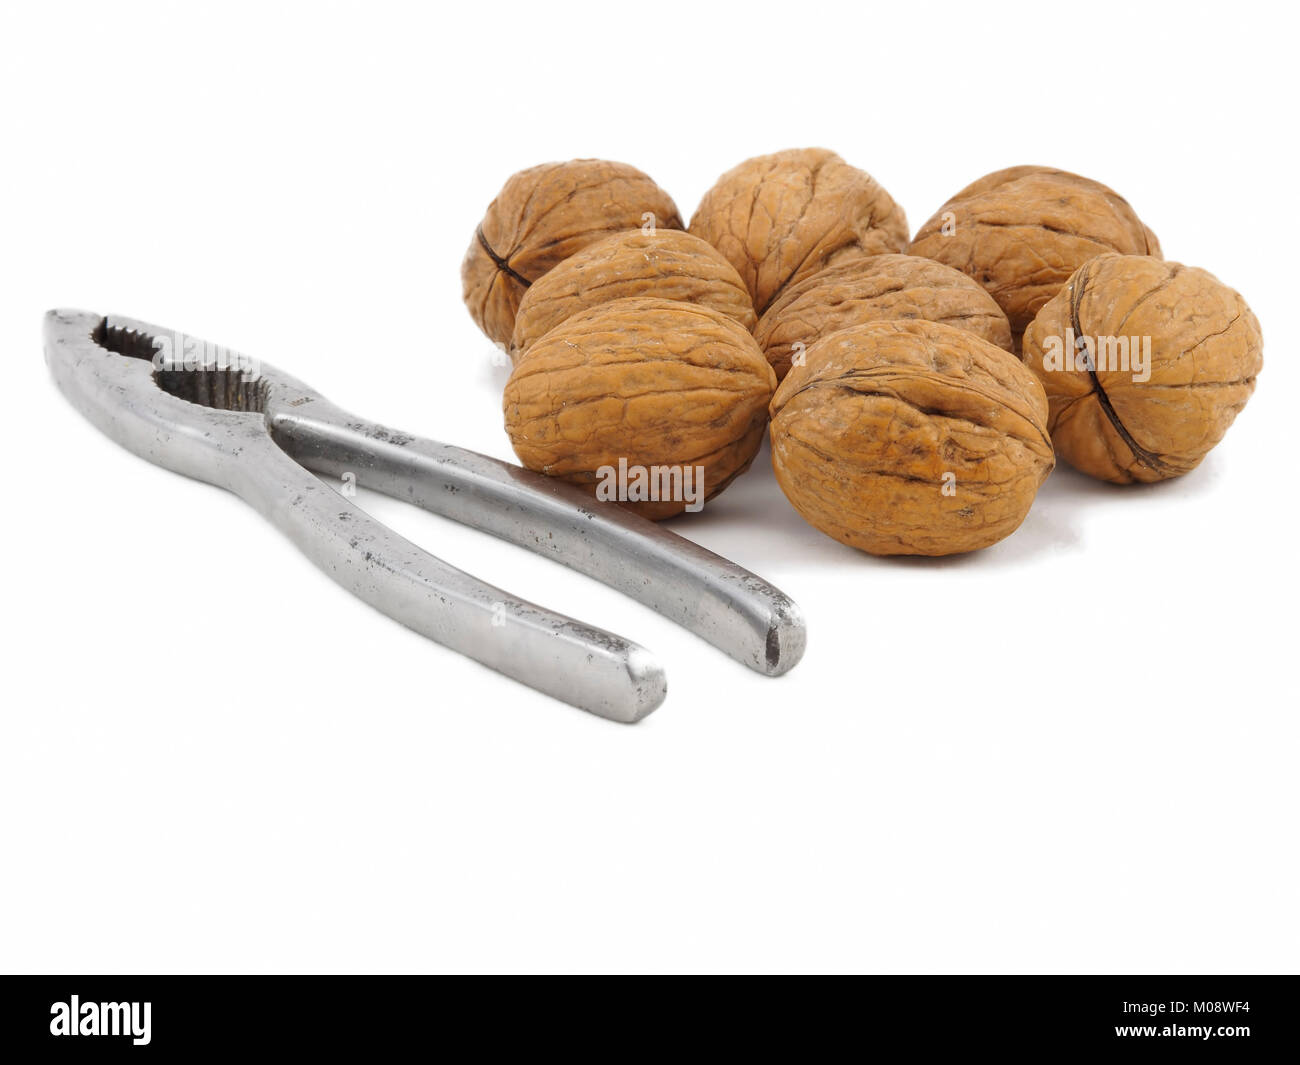 Food, group of walnuts and one nutcracker Stock Photo